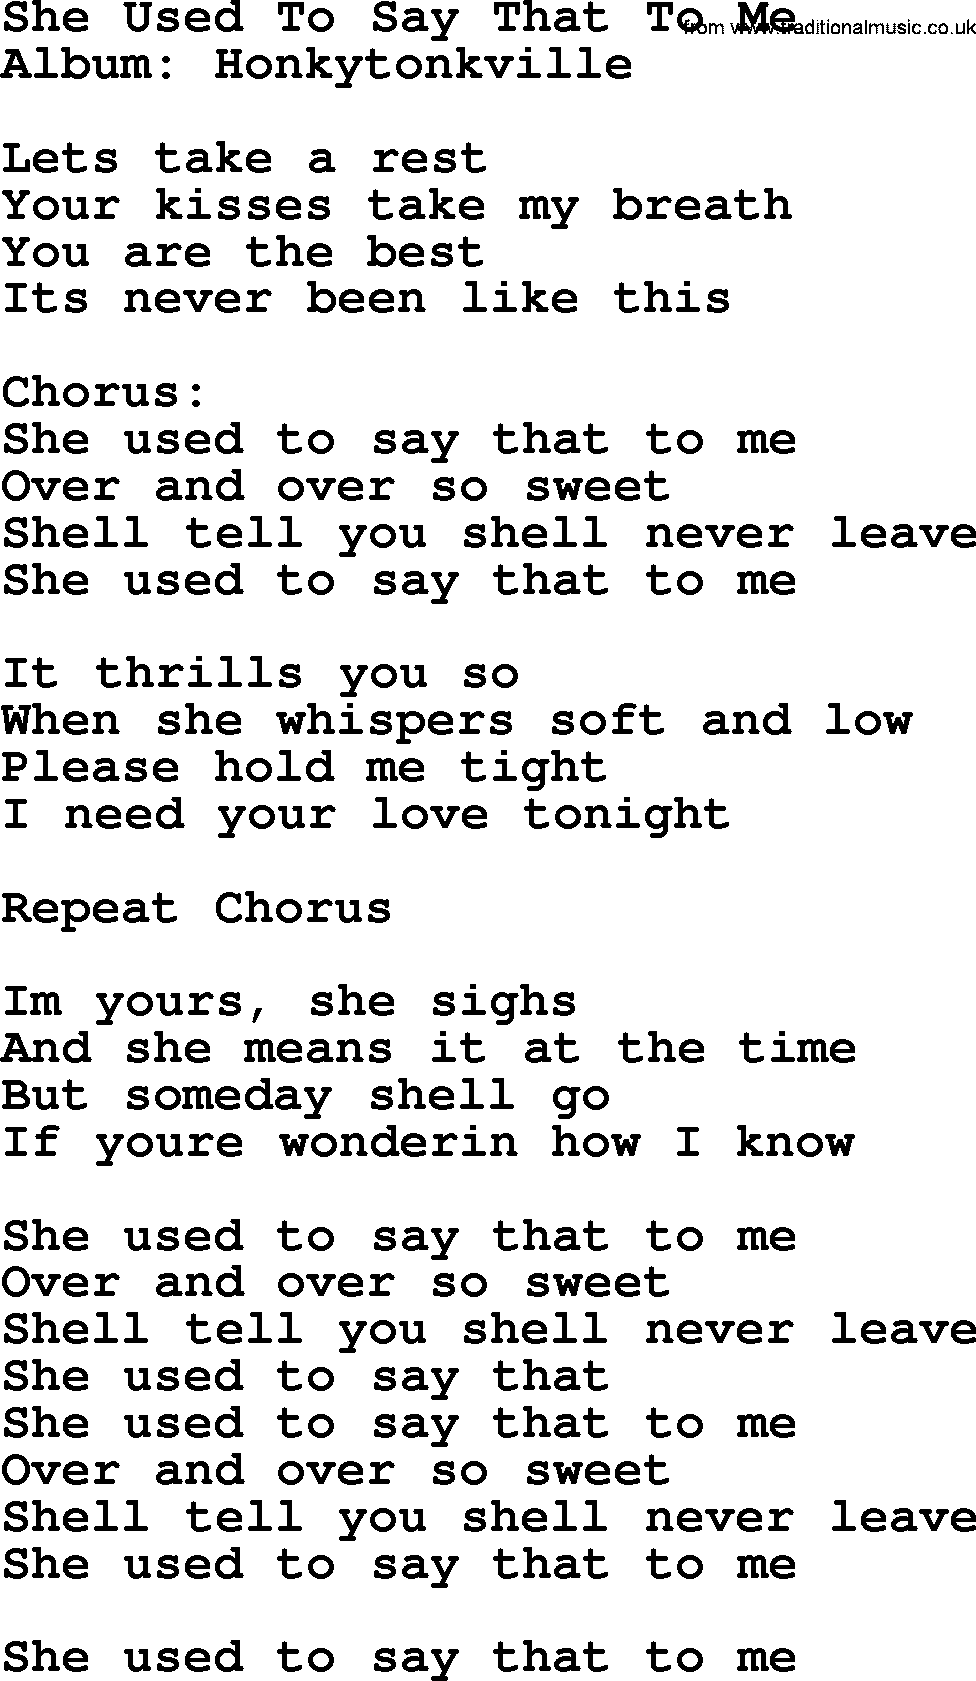 George Strait song: She Used To Say That To Me, lyrics